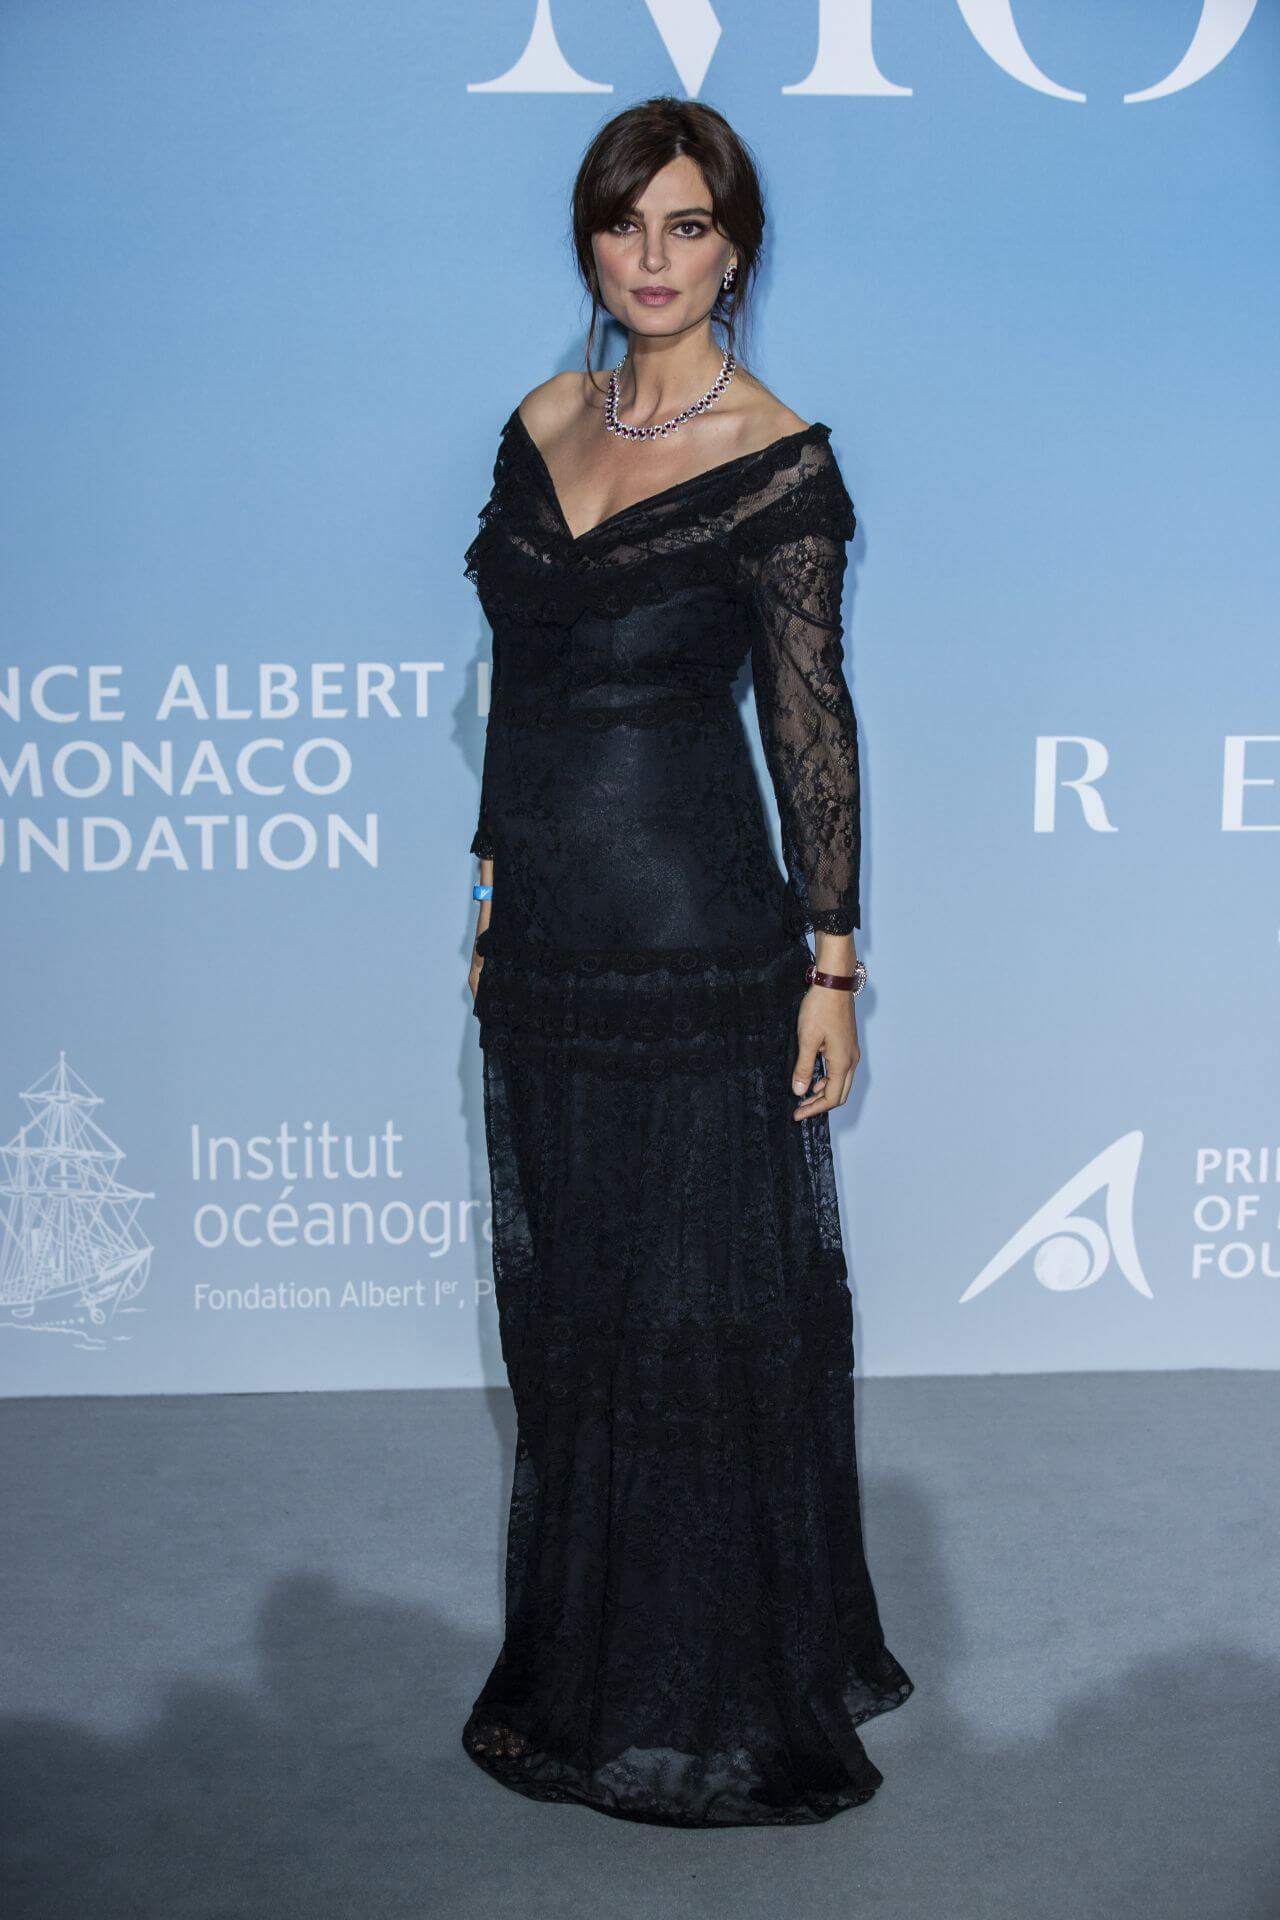 Catrinel Menghia In Black Net Fabric Full Sleeves Long Gown Dress At Monte-Carlo Gala for the Global Ocean